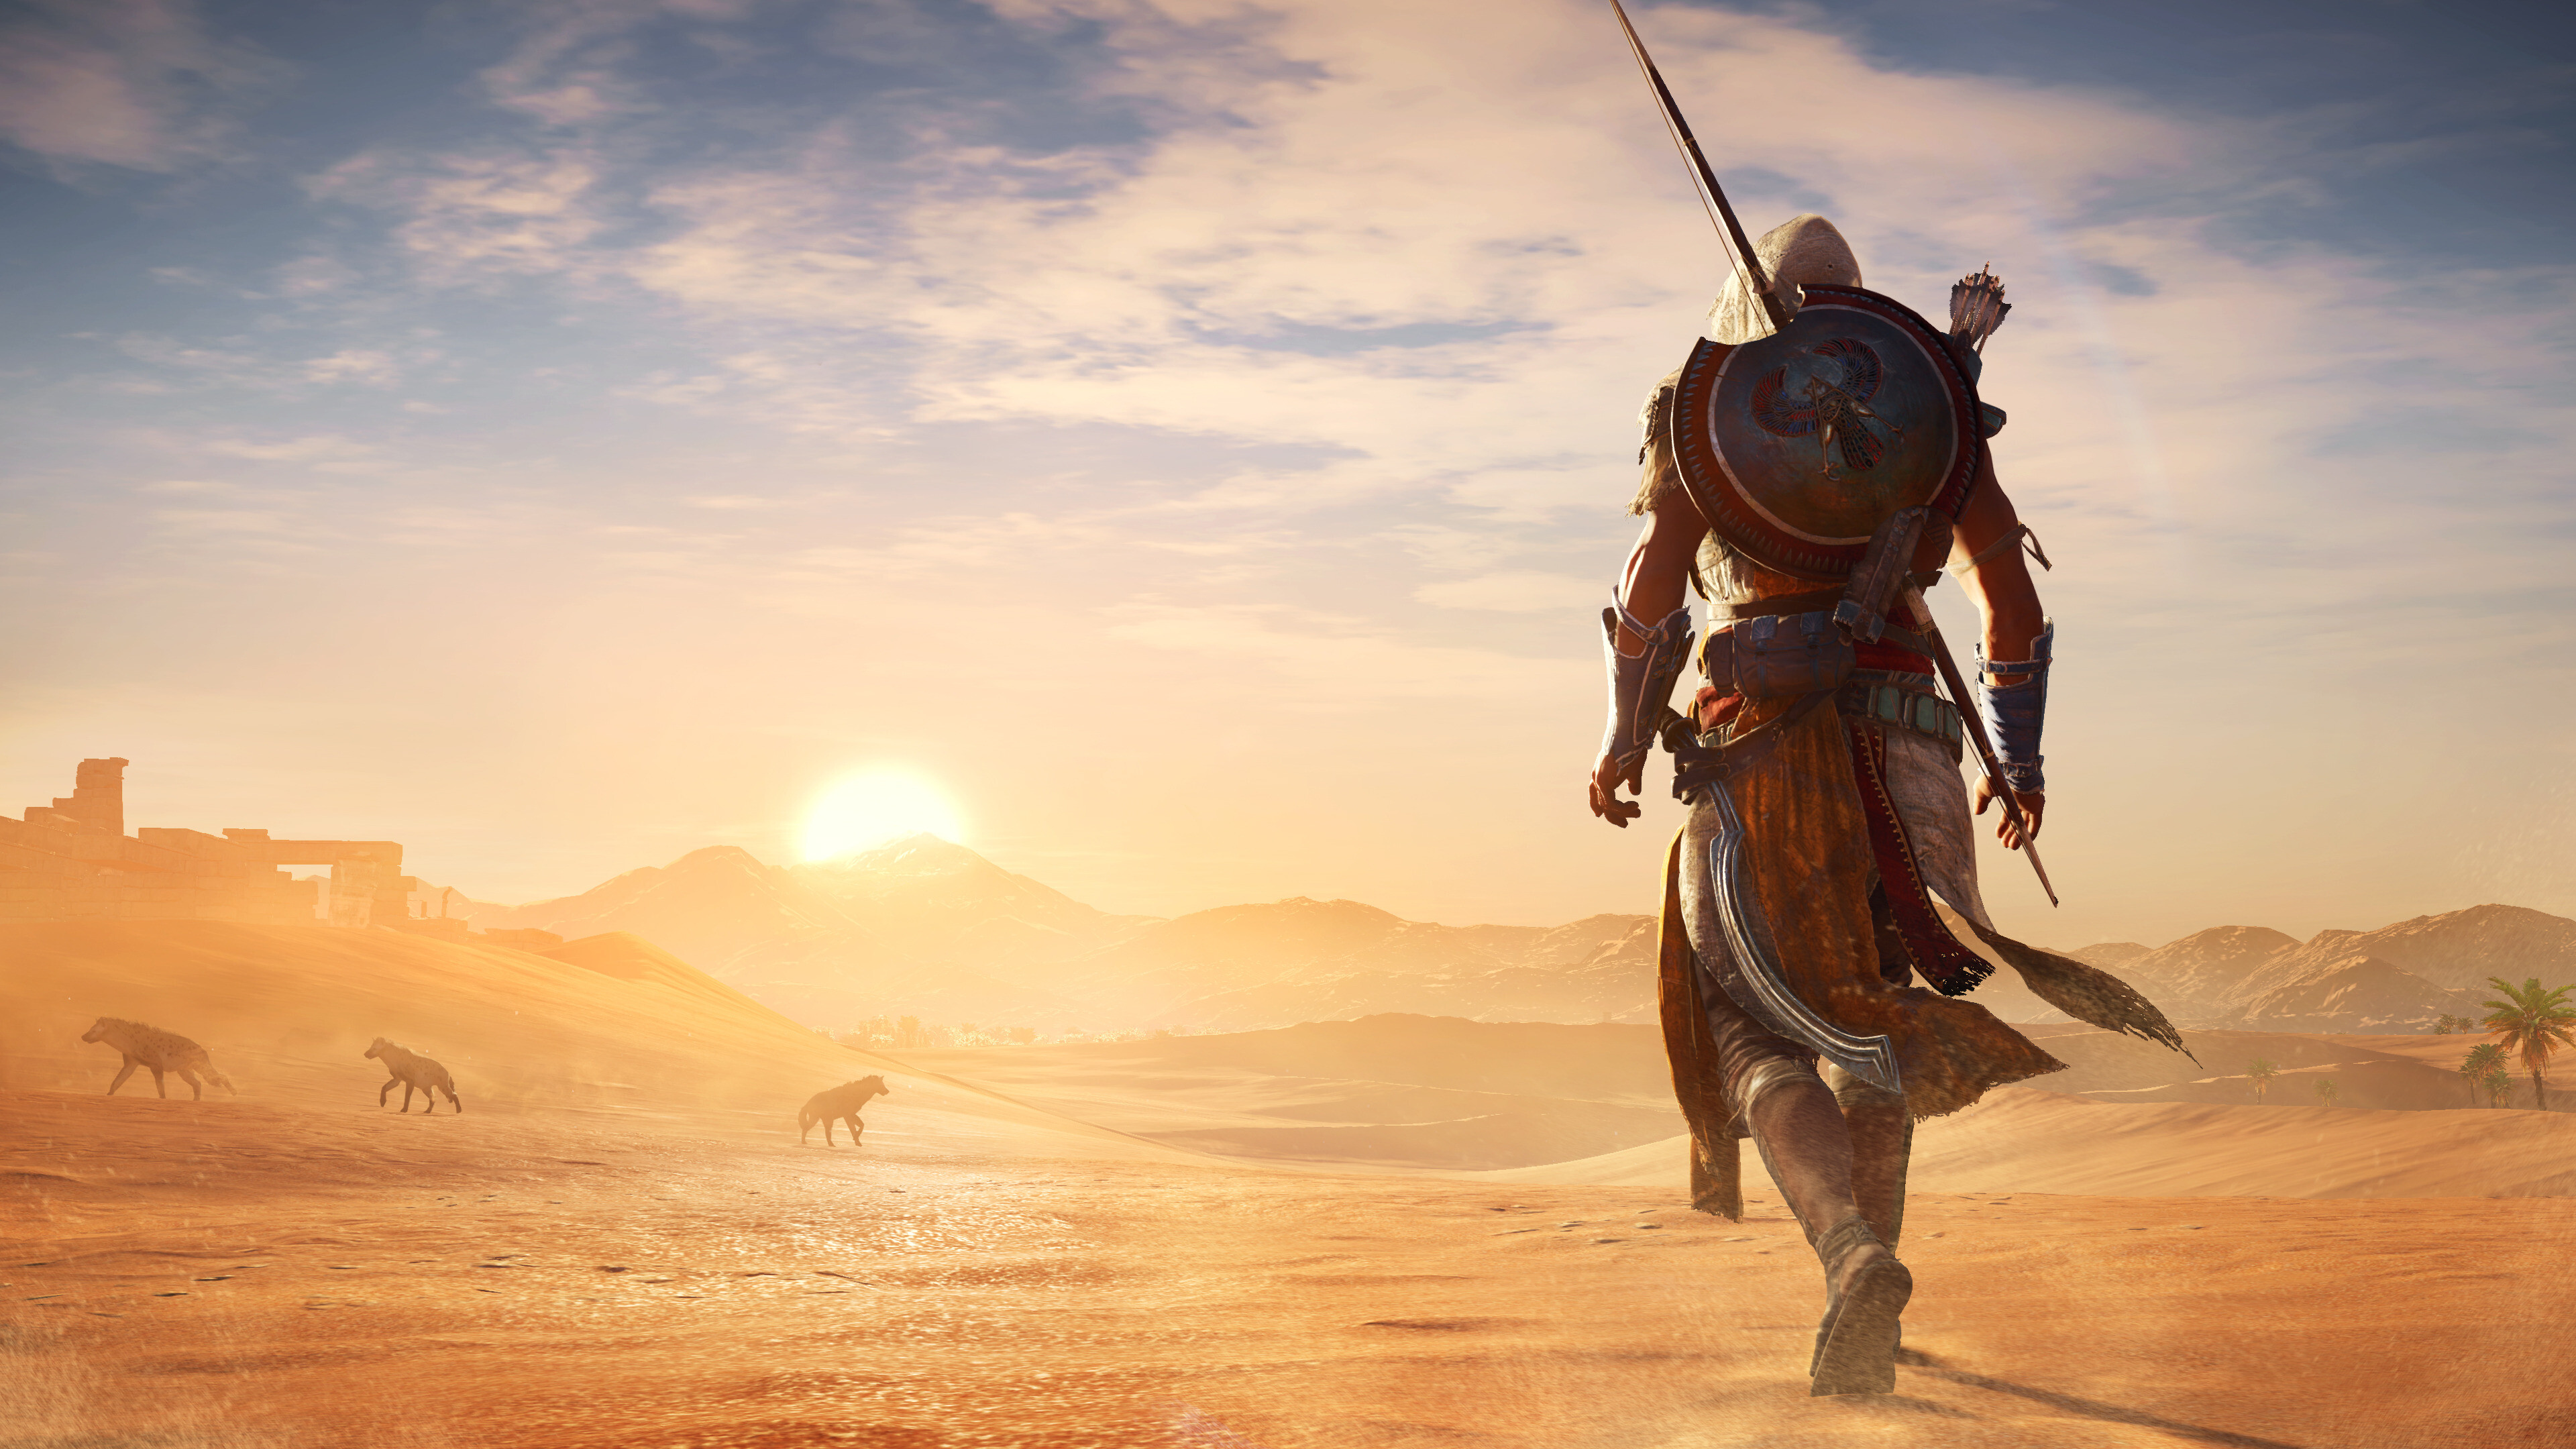 Assassin's Creed: Origins, The tenth main installment in the series developed by Ubisoft. 3840x2160 4K Wallpaper.